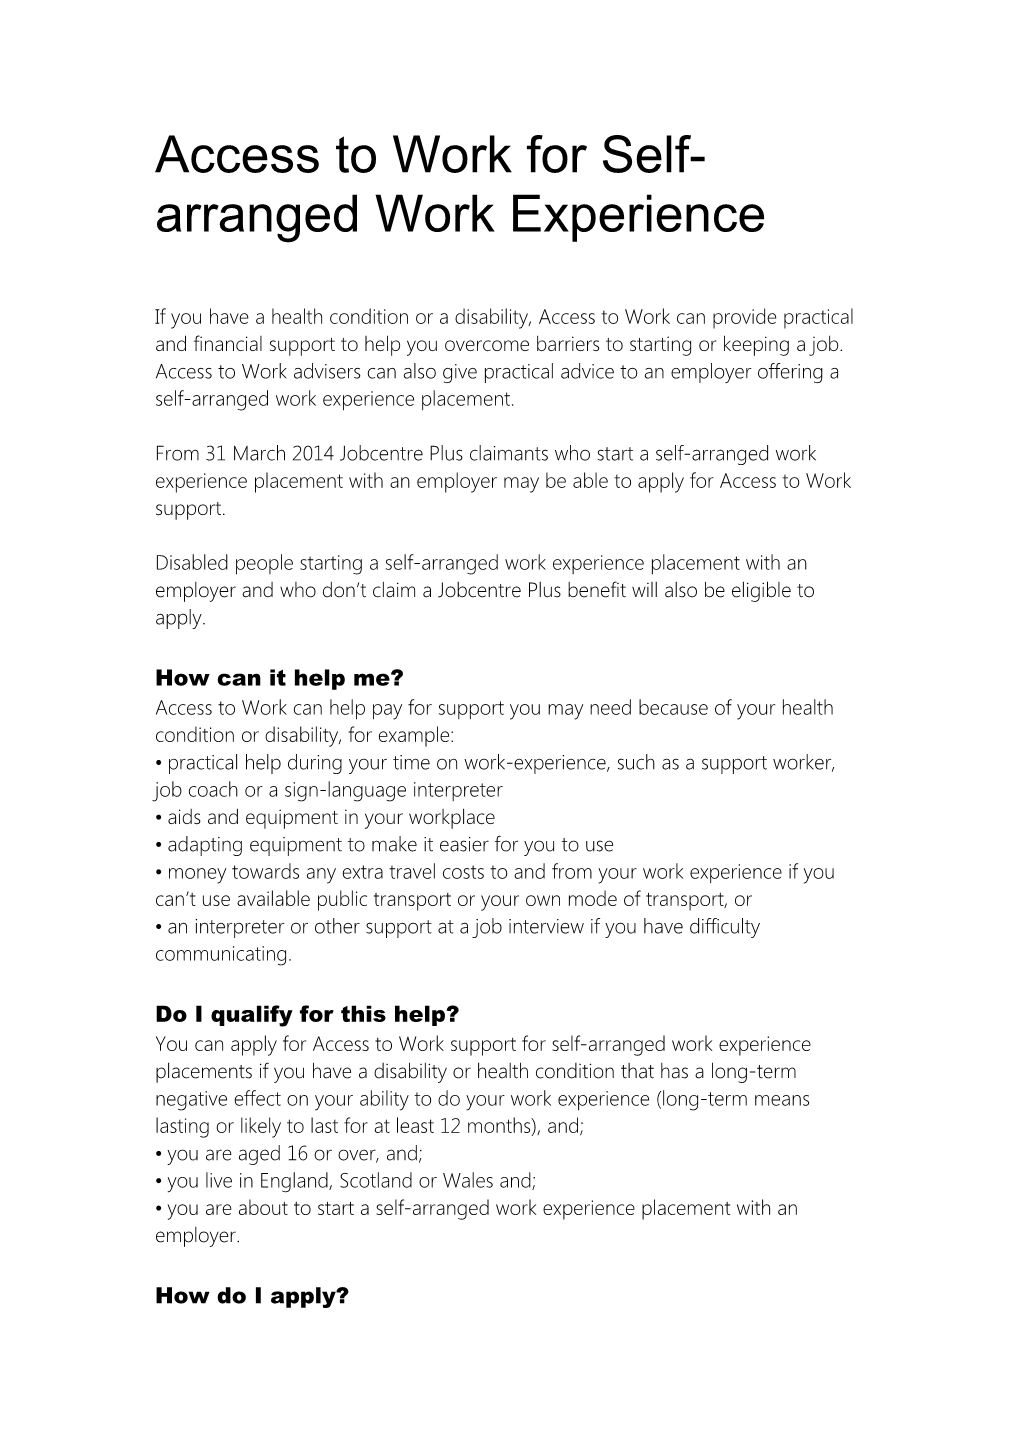 Access to Work for Work Experience